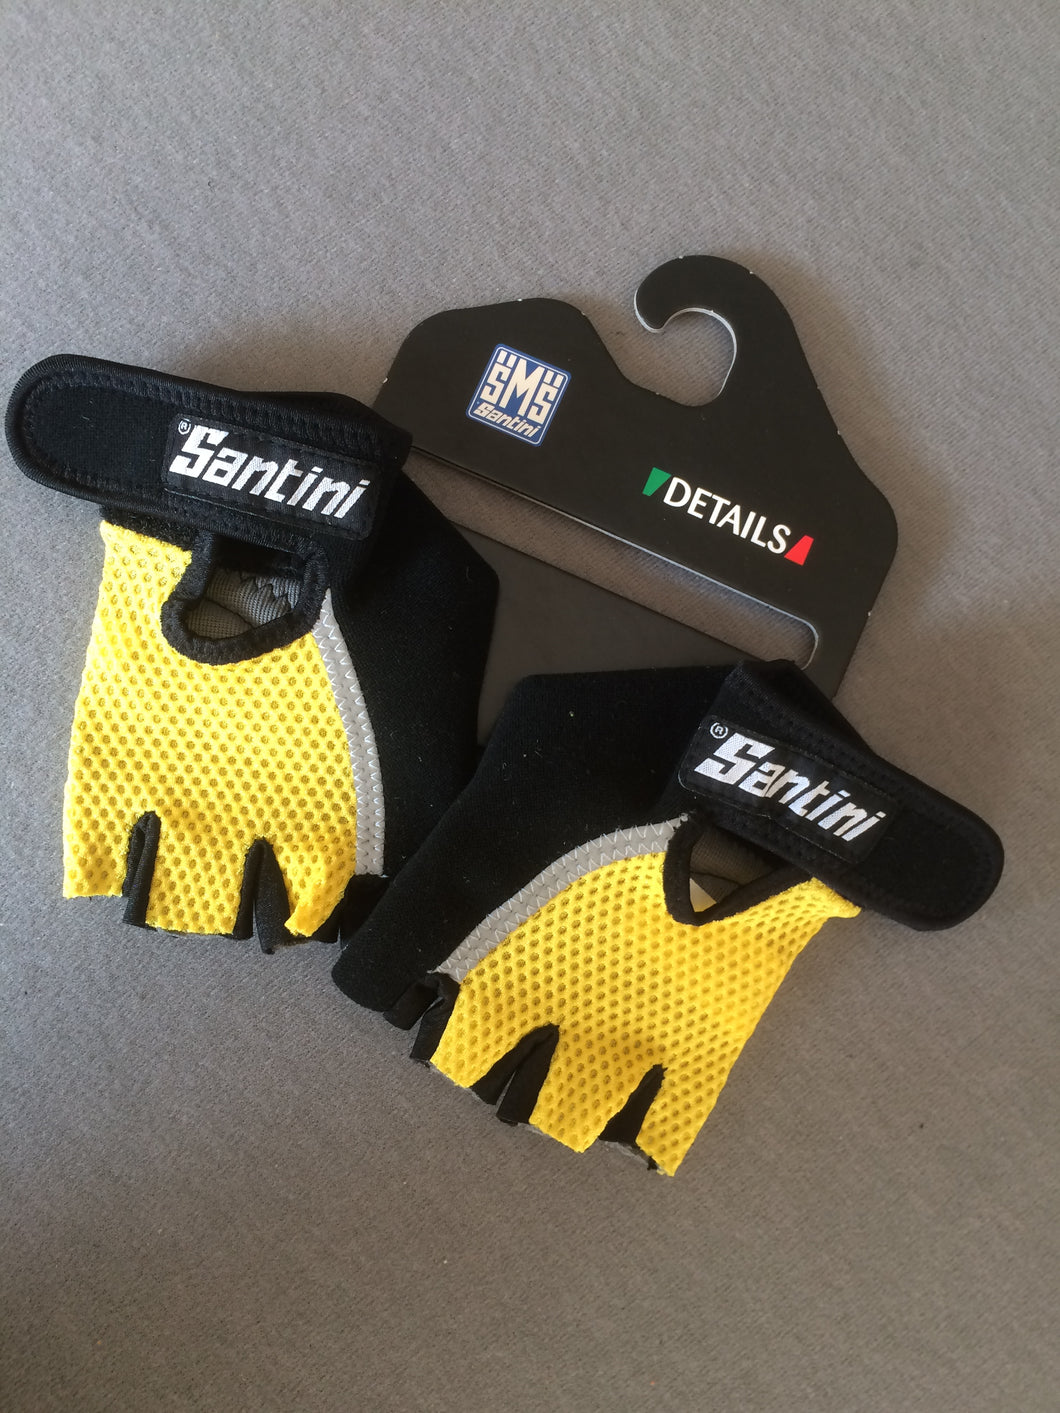 GLOVES : Santini 365 Silicon Gel Racing Cycling Gloves [S/M]